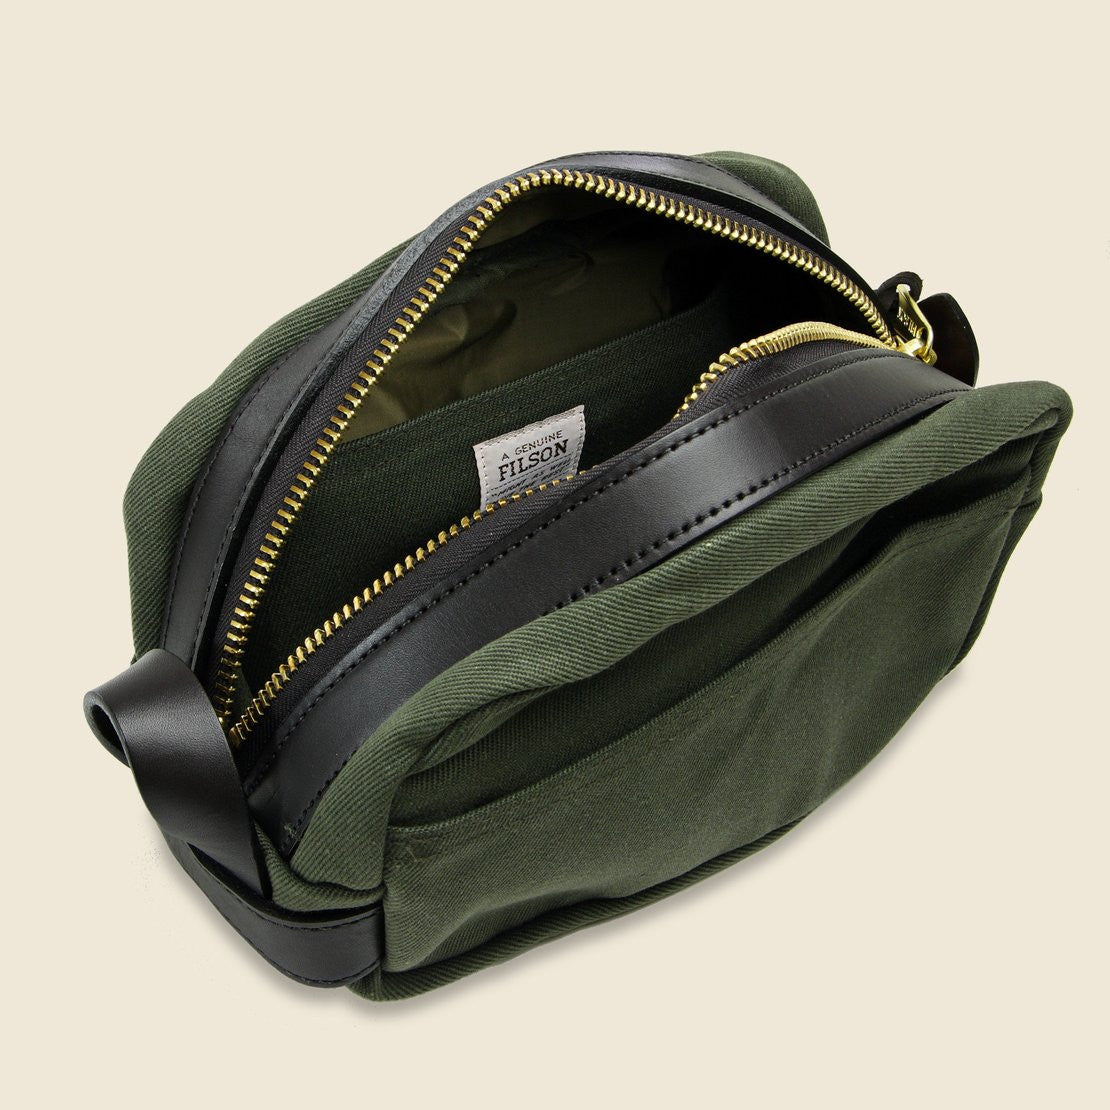 Travel Kit - Otter Green - Filson - STAG Provisions - Accessories - Bags / Luggage